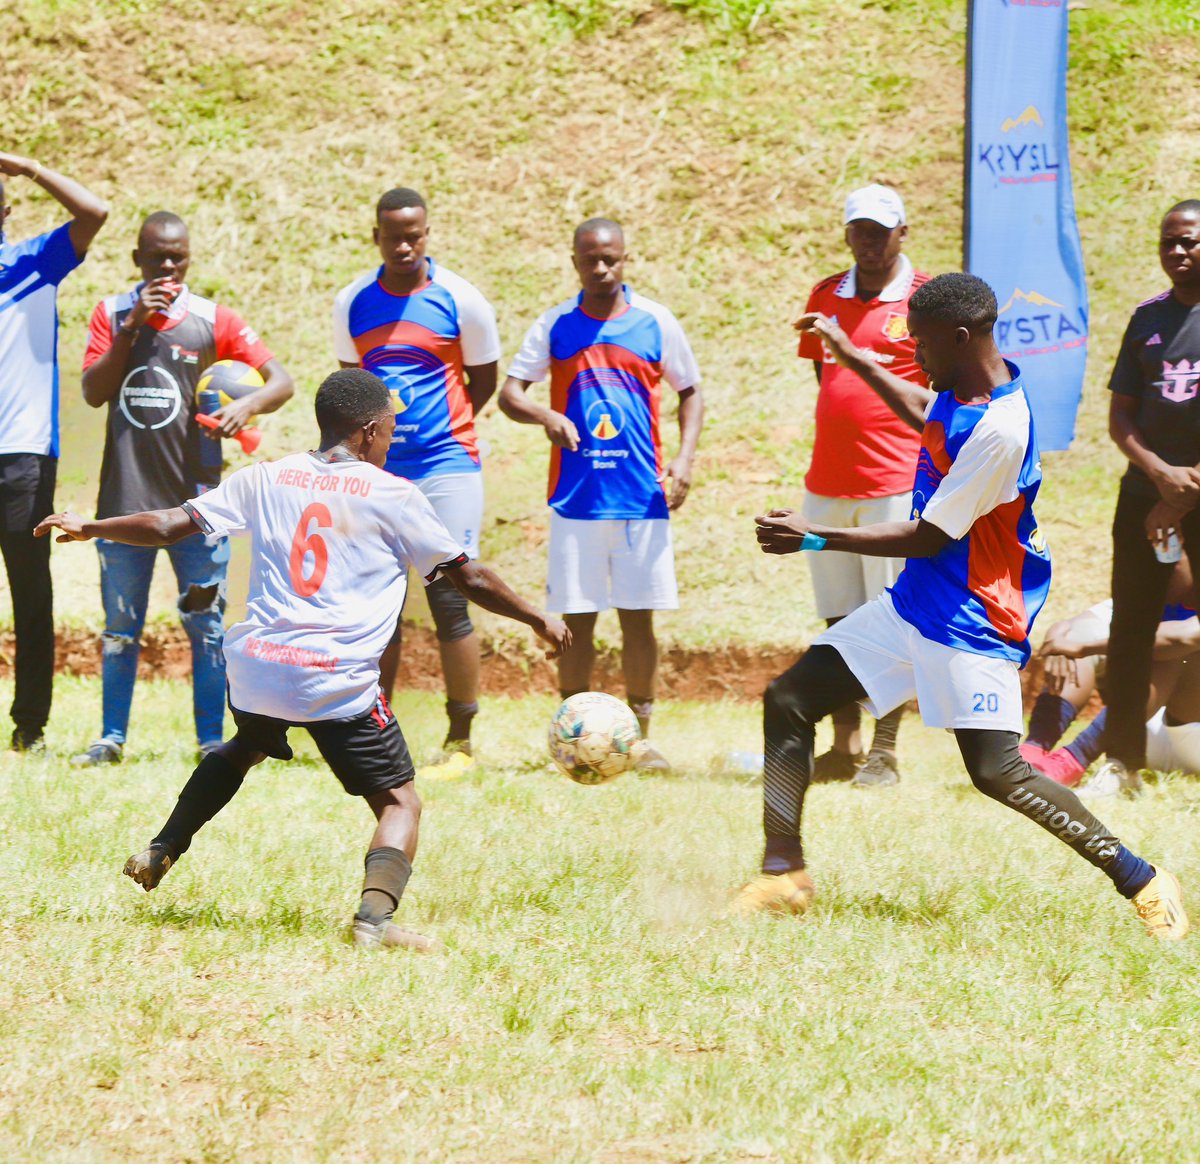 Tropical Bank conquered Centenary Bank (3-1) in the Corporate Sports Network football match at MUBs sports ground, Nakawa
#NetworkingThroughSports #corporateSportsnetwork
@corporates256 #Hereforyou